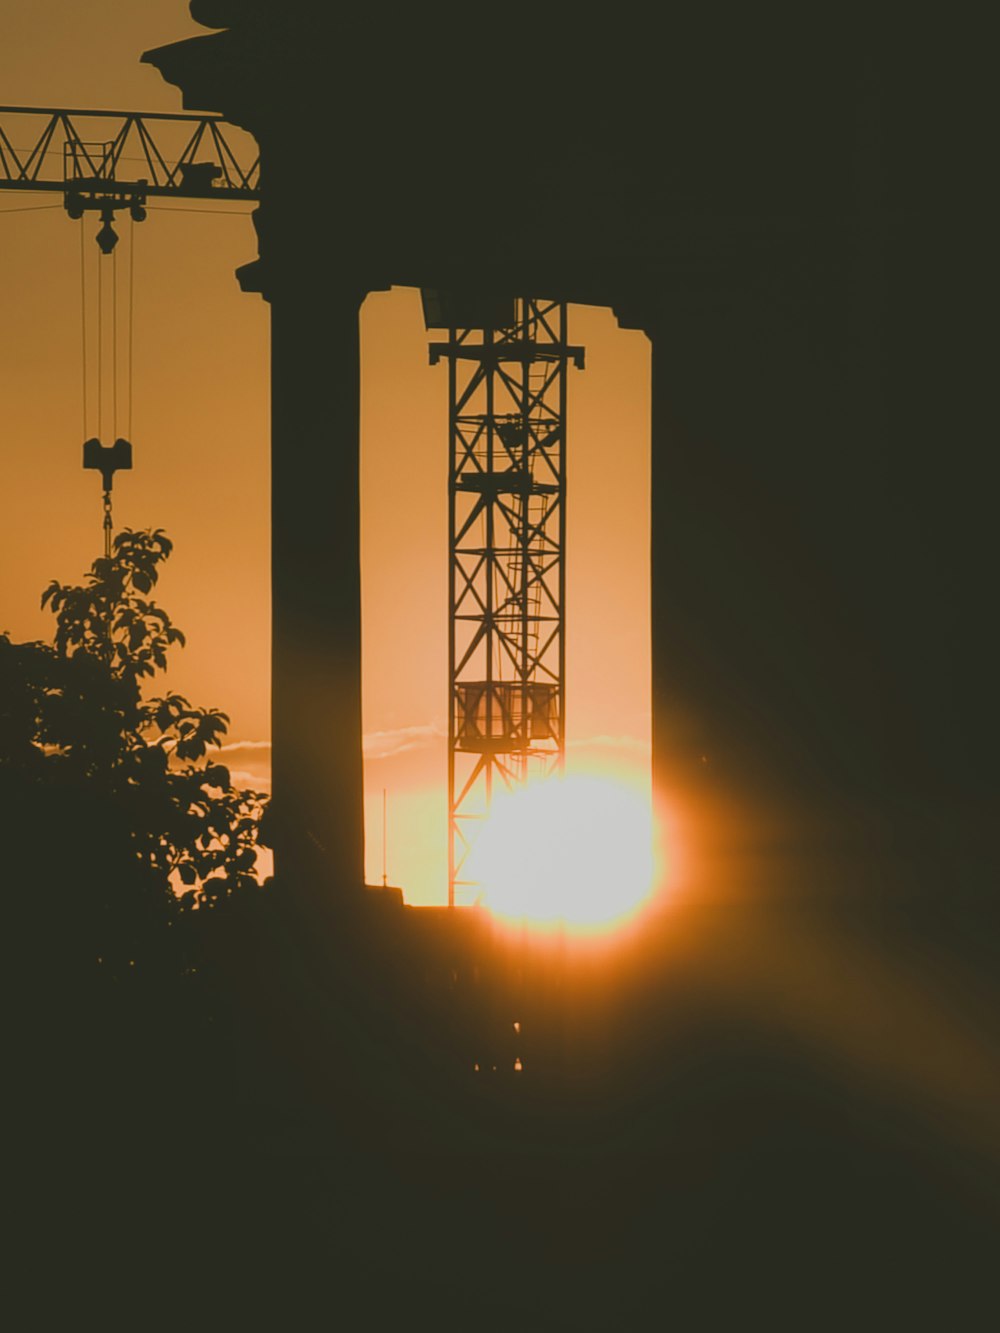 the sun is setting behind a tower crane